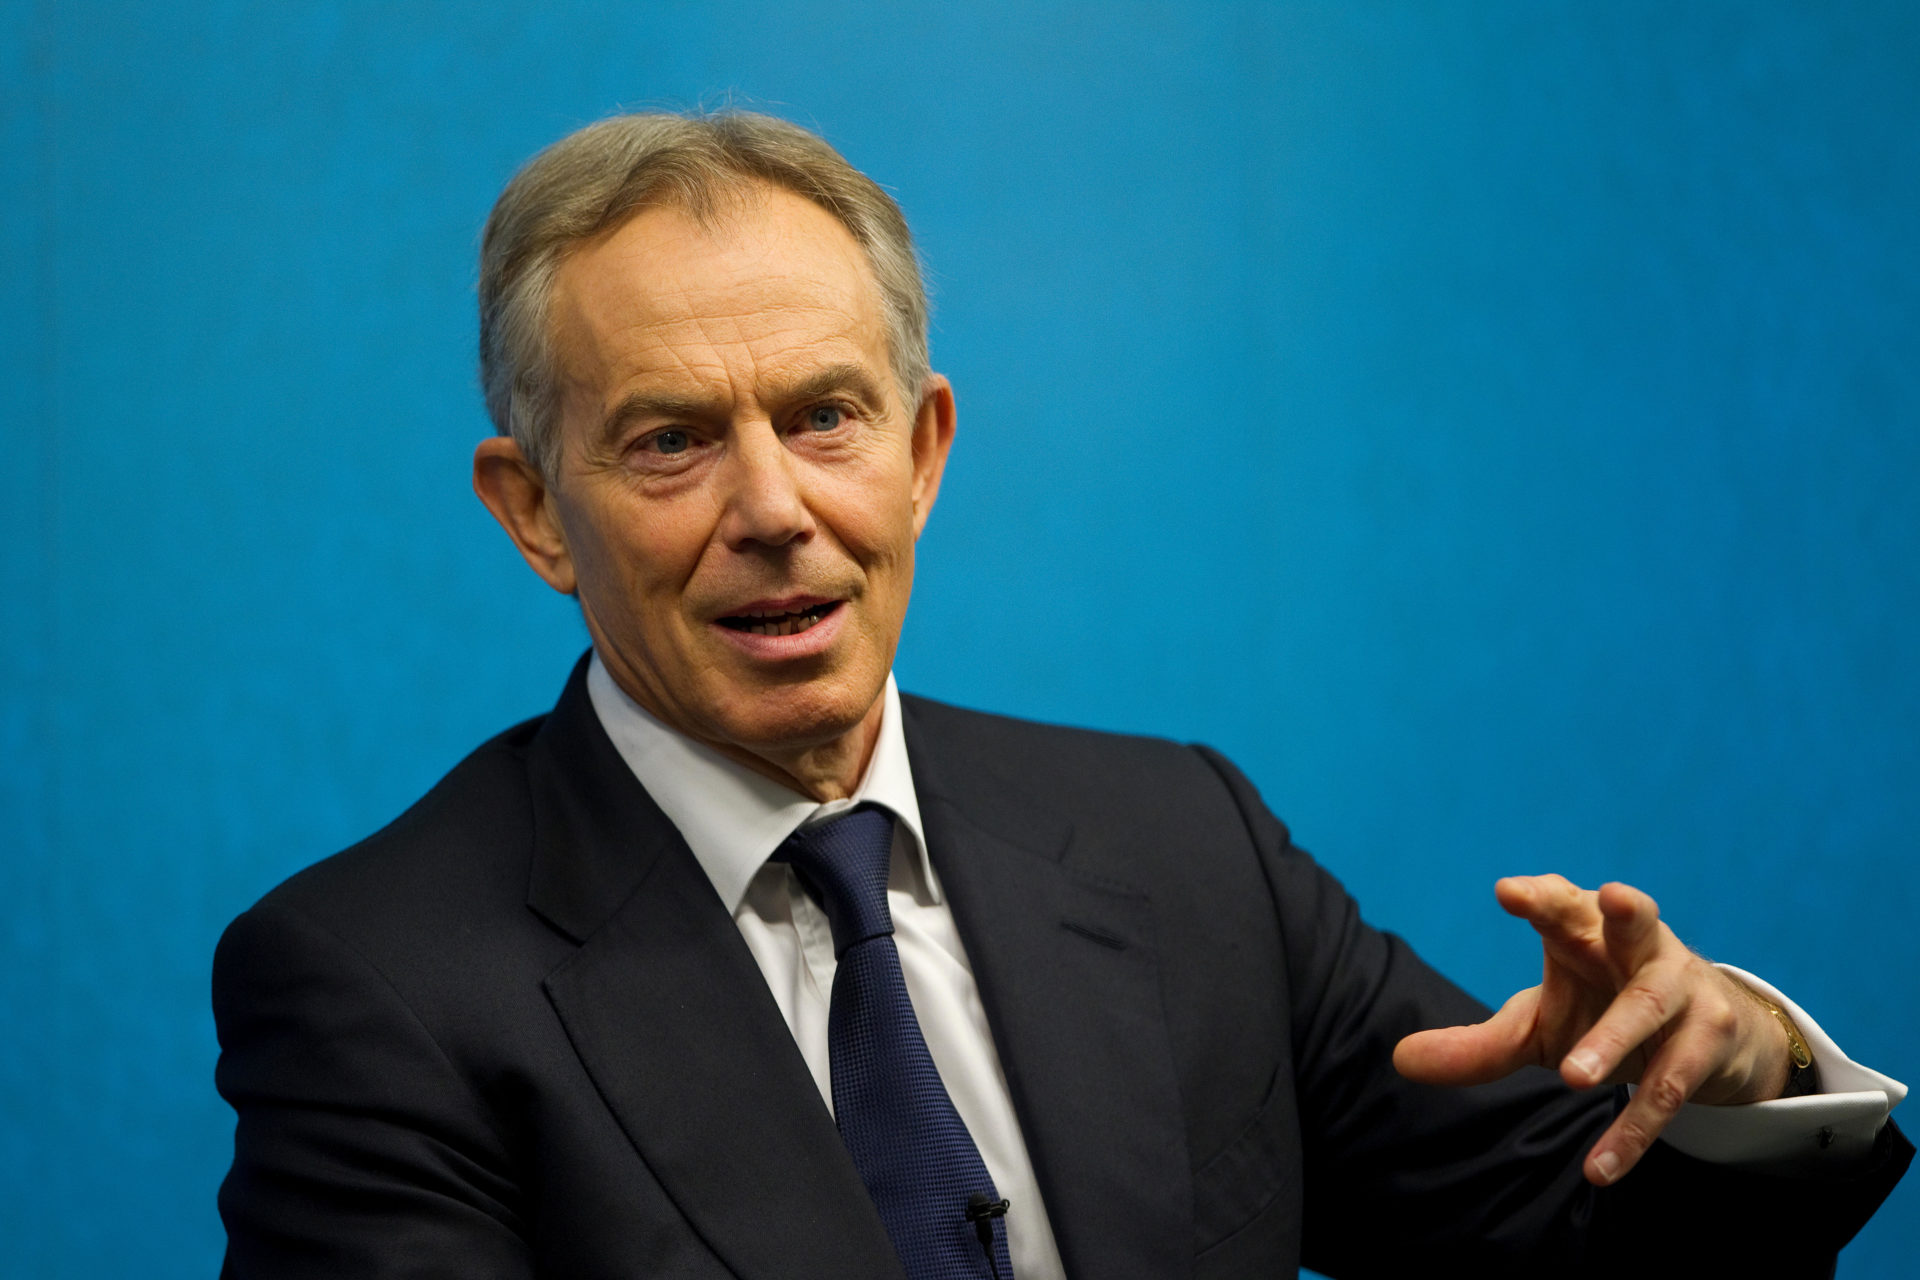 Tony Blair gives a speech at the Royal Institute of International Affairs